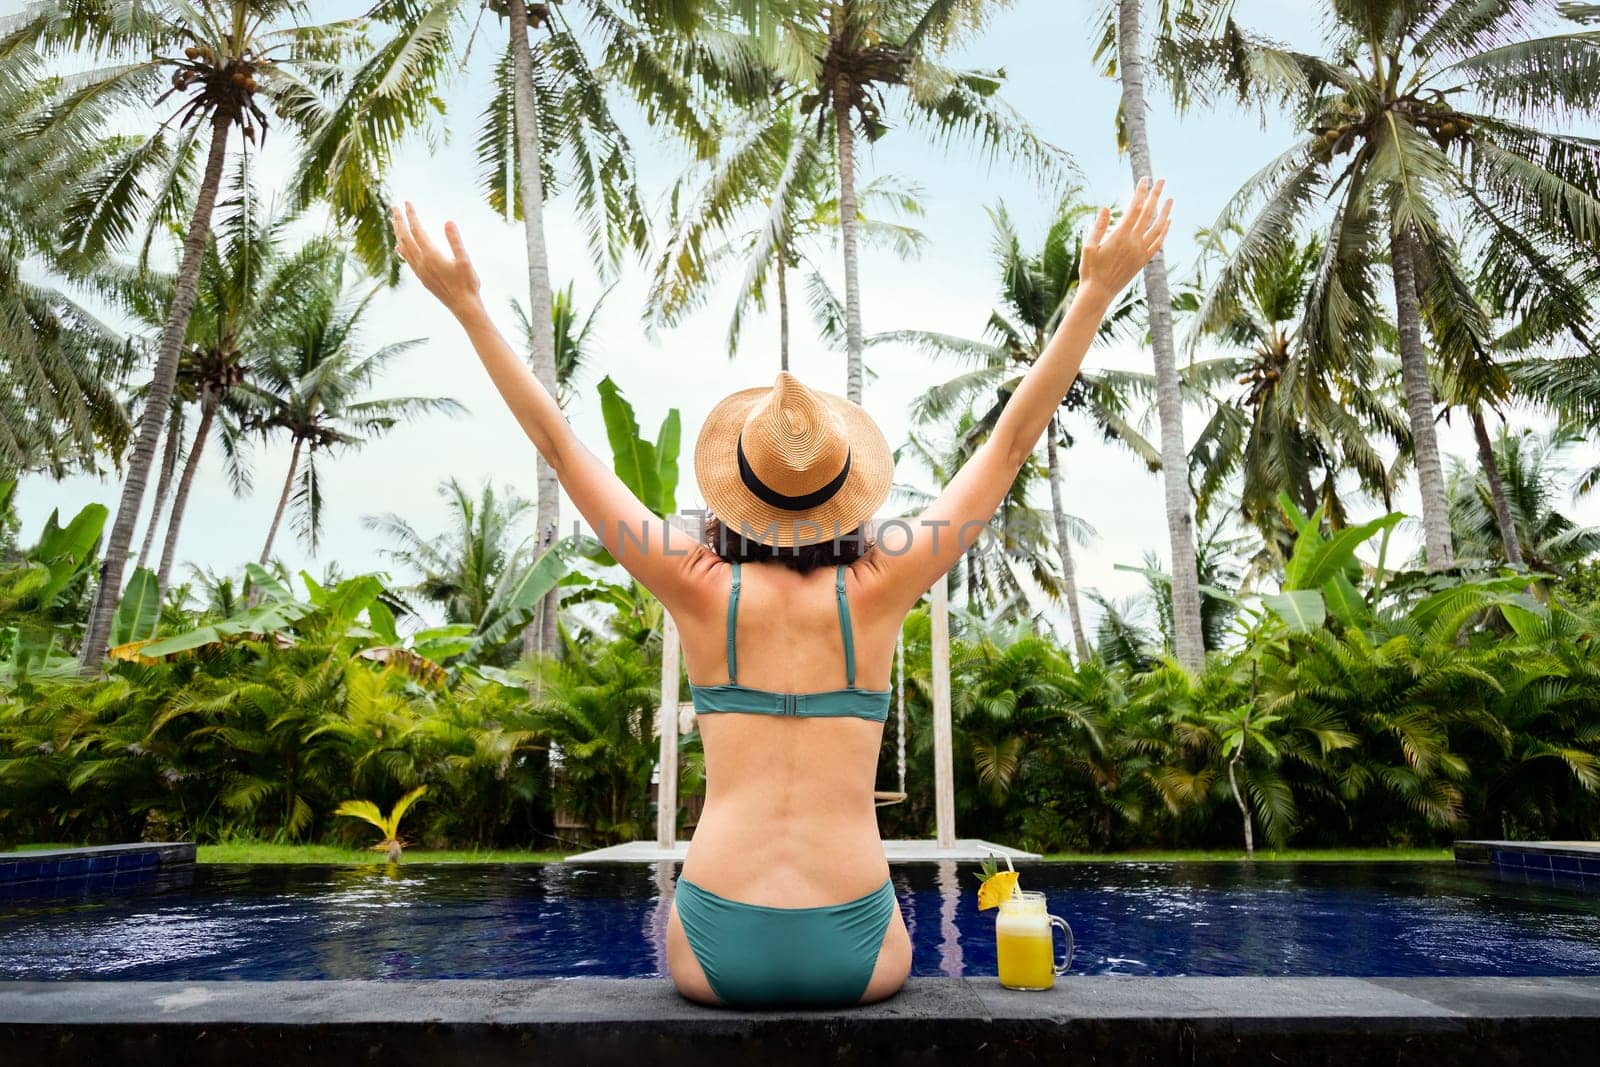 Back view of happy woman in bikini with arms up enjoying vacation on tropical paradise. Female relaxing in swimming pool, enjoying freedom in nature. Trip, vacation, mental health and healthy lifestyle concept.